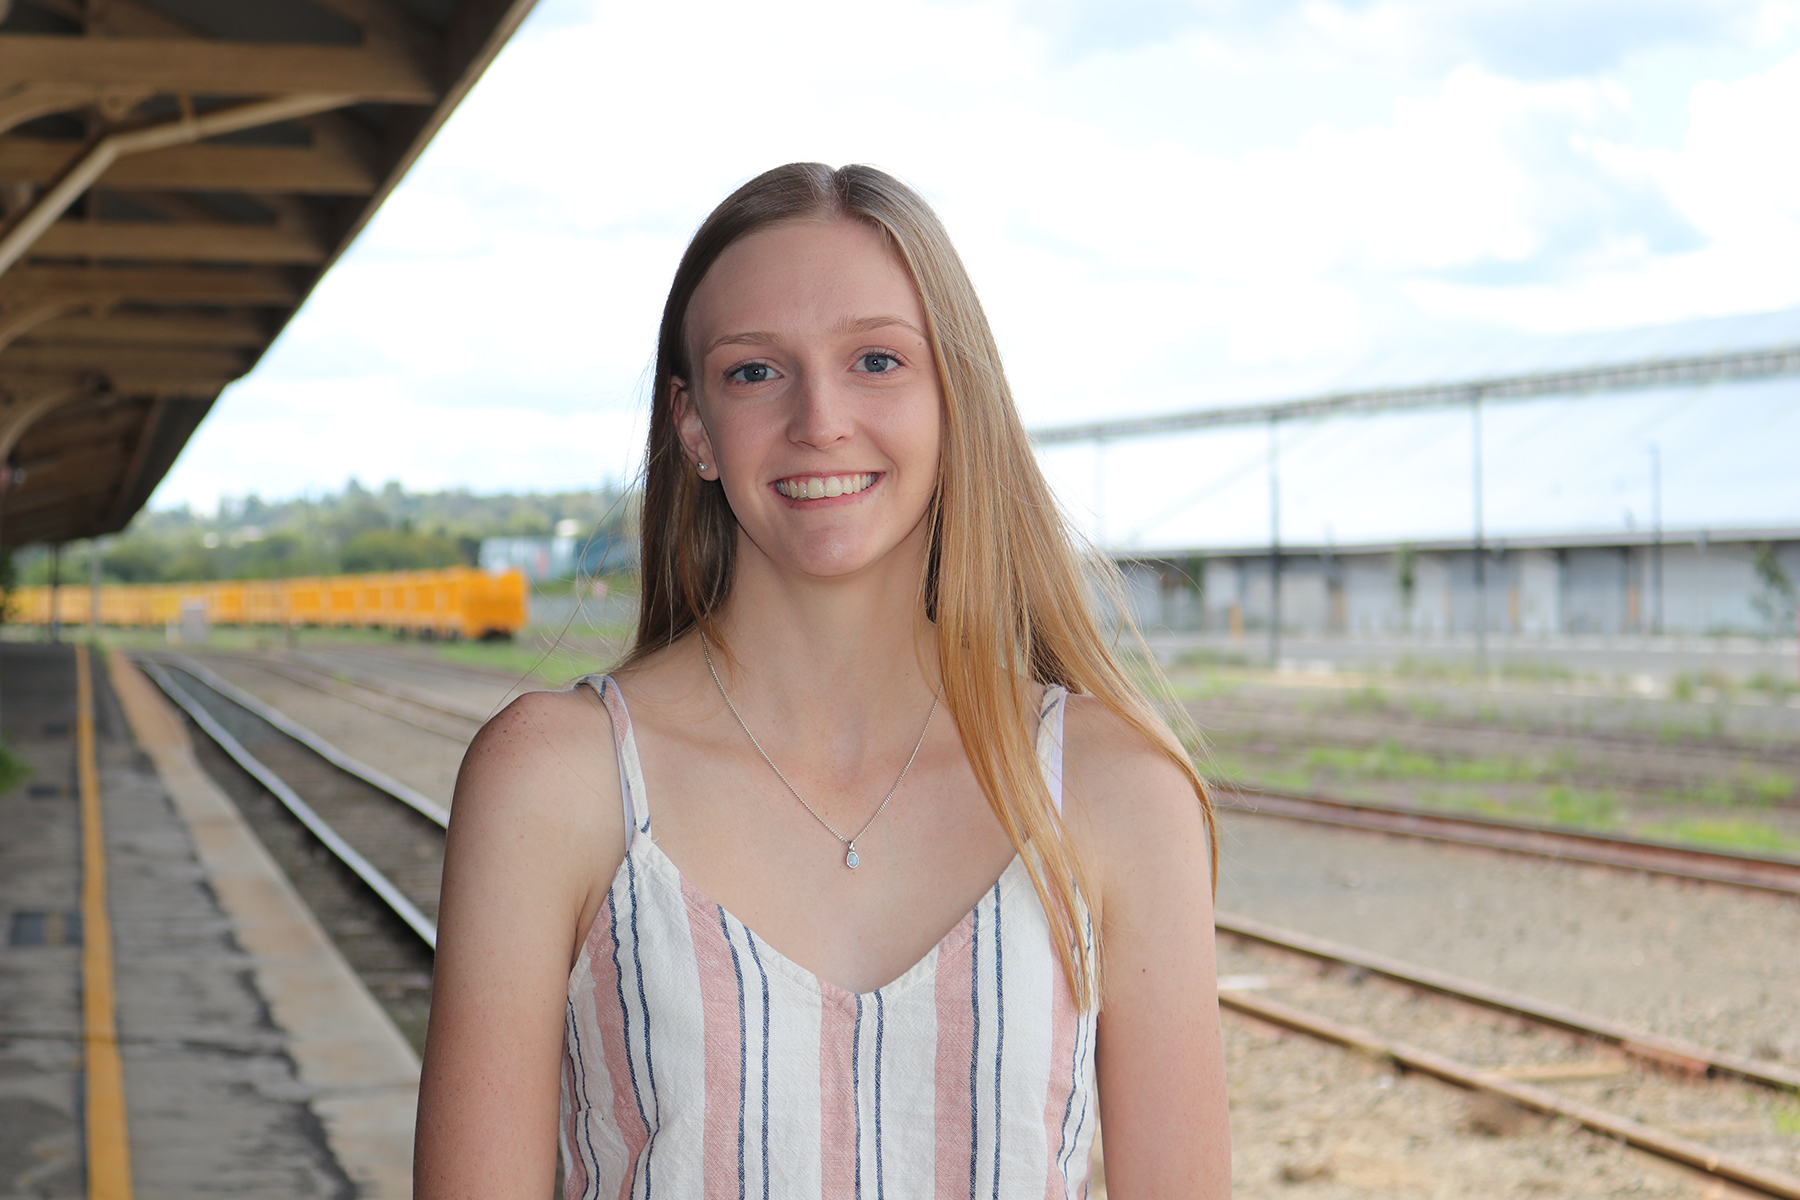 Inland Rail undergraduate scholarship recipient Hannah Fowler is undertaking a Bachelor of Medical Laboratory Science at the University of Southern Queensland